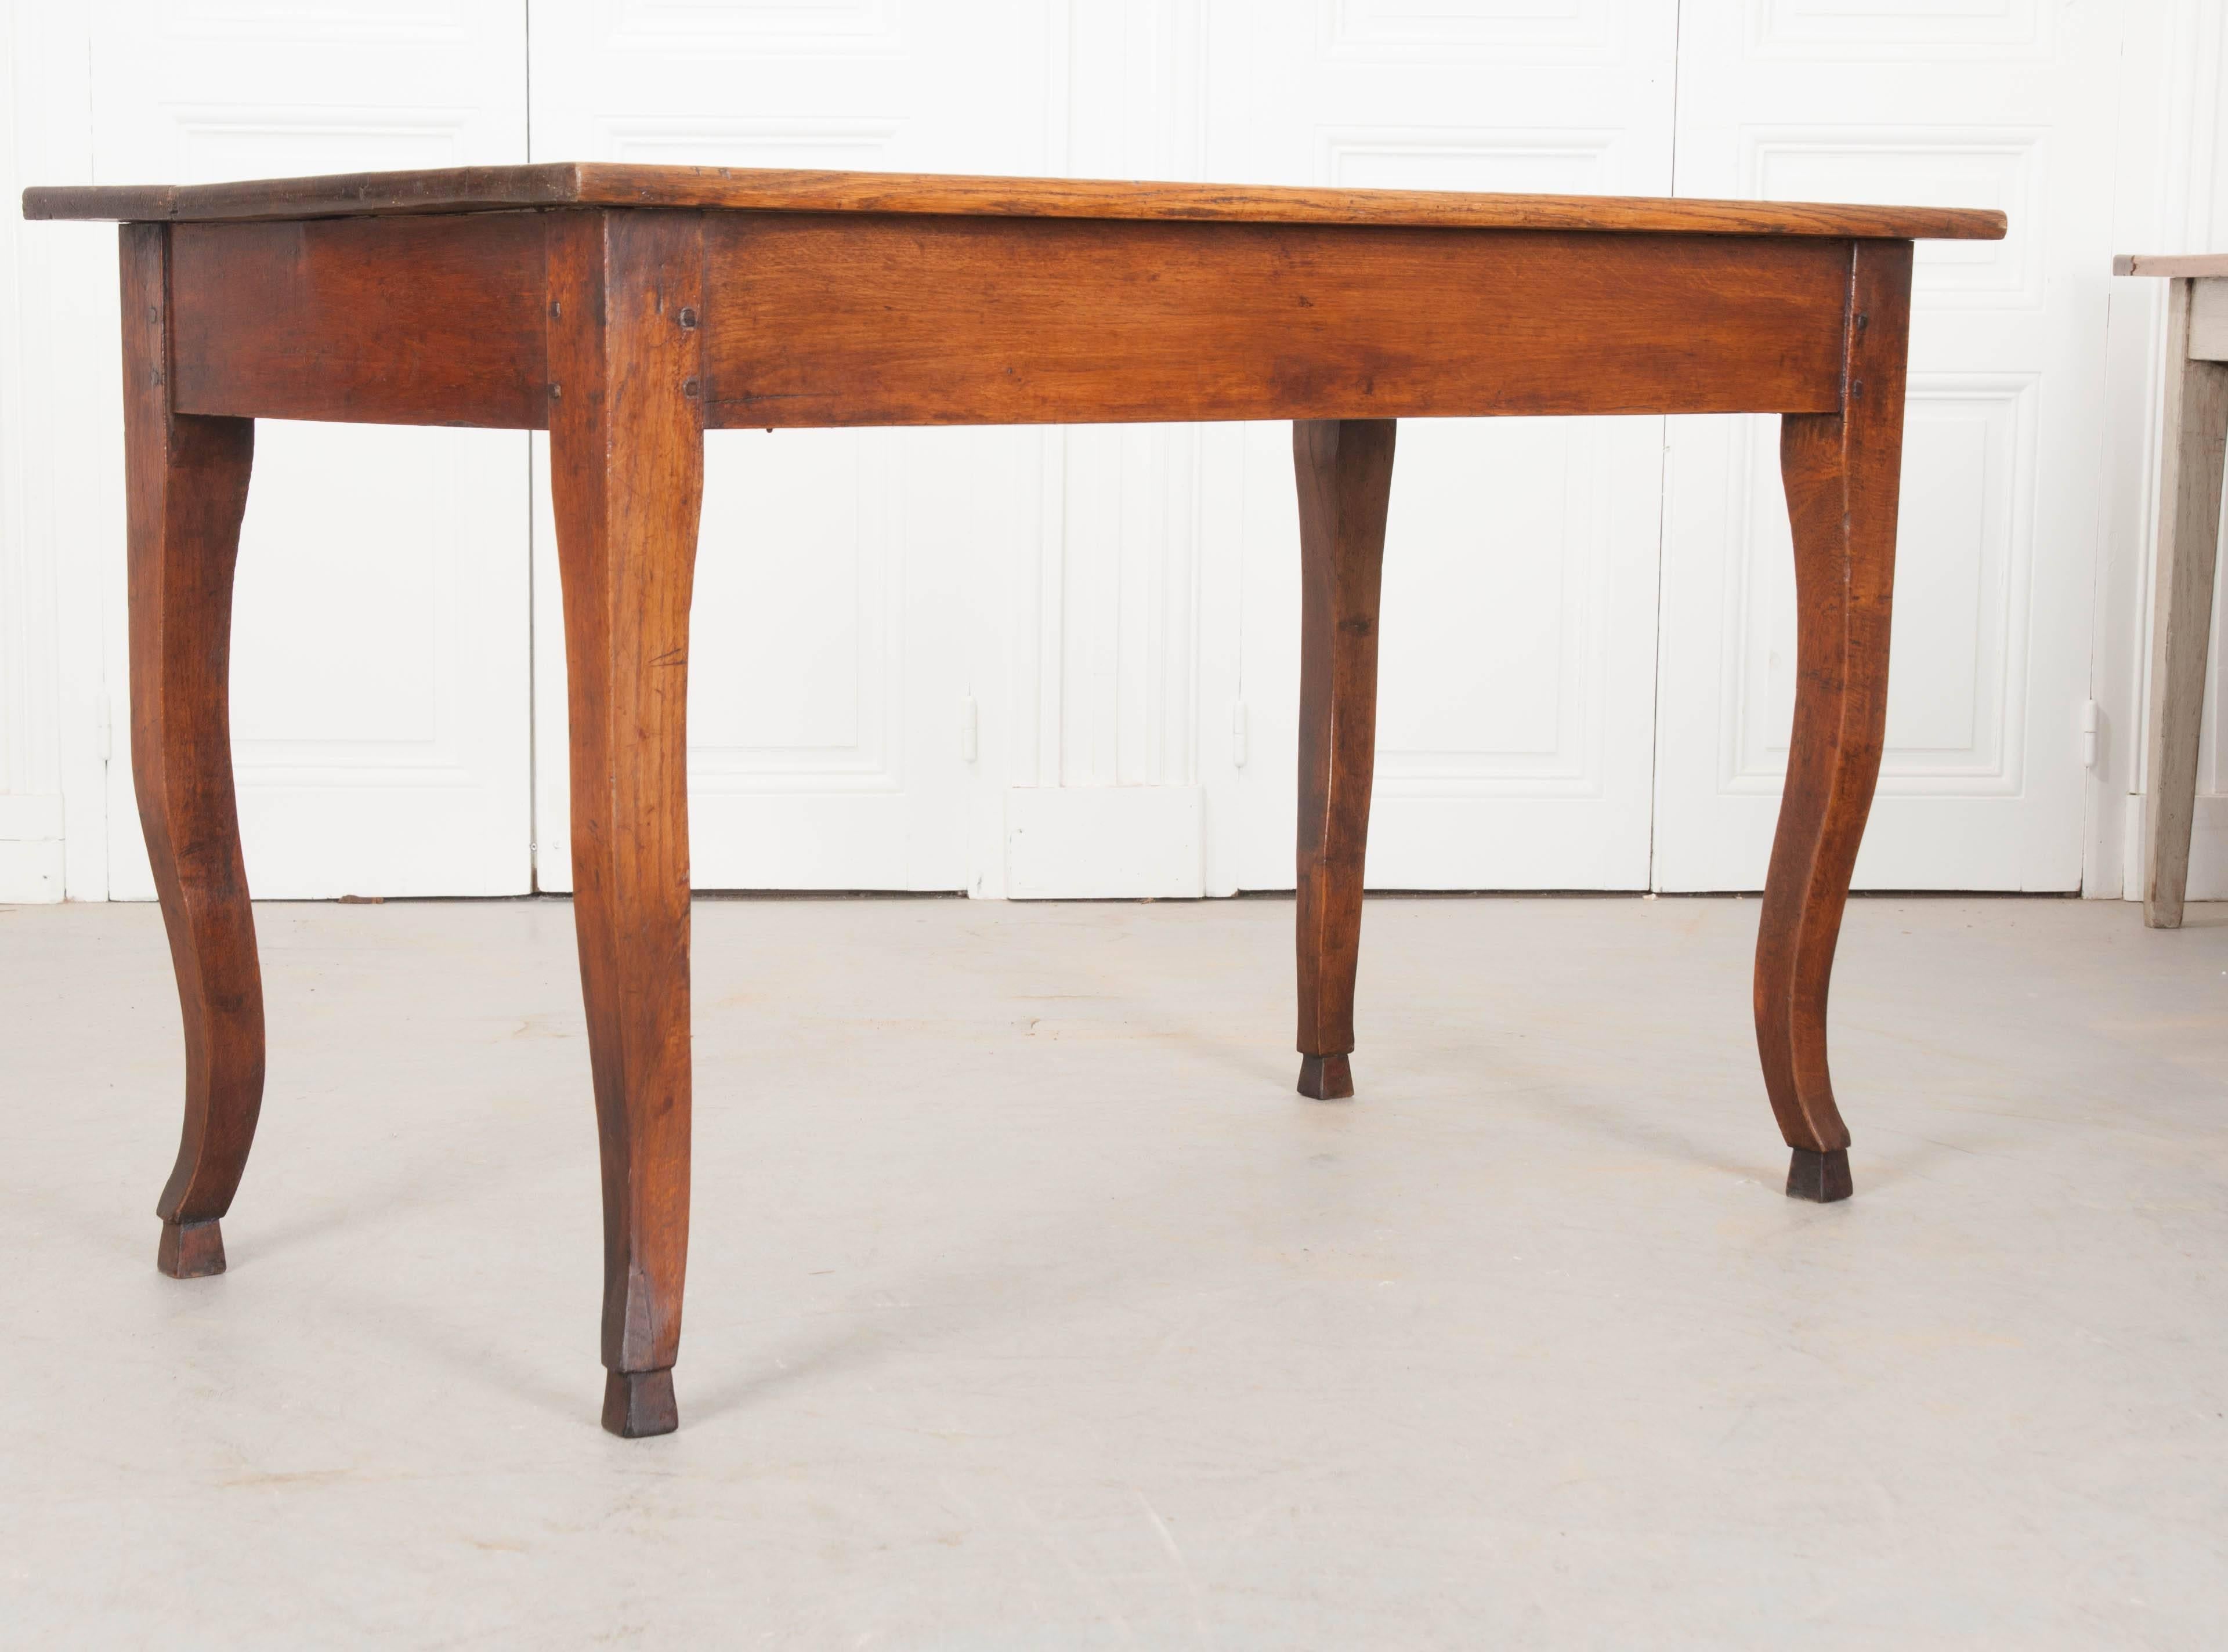 A wonderful oak dining table, with hand carved cabriole legs, from 19th century, France. This smaller dining table would be best suited for a breakfast room, kitchen, or small dining space. Ideal for someone with limited space, the table is charming